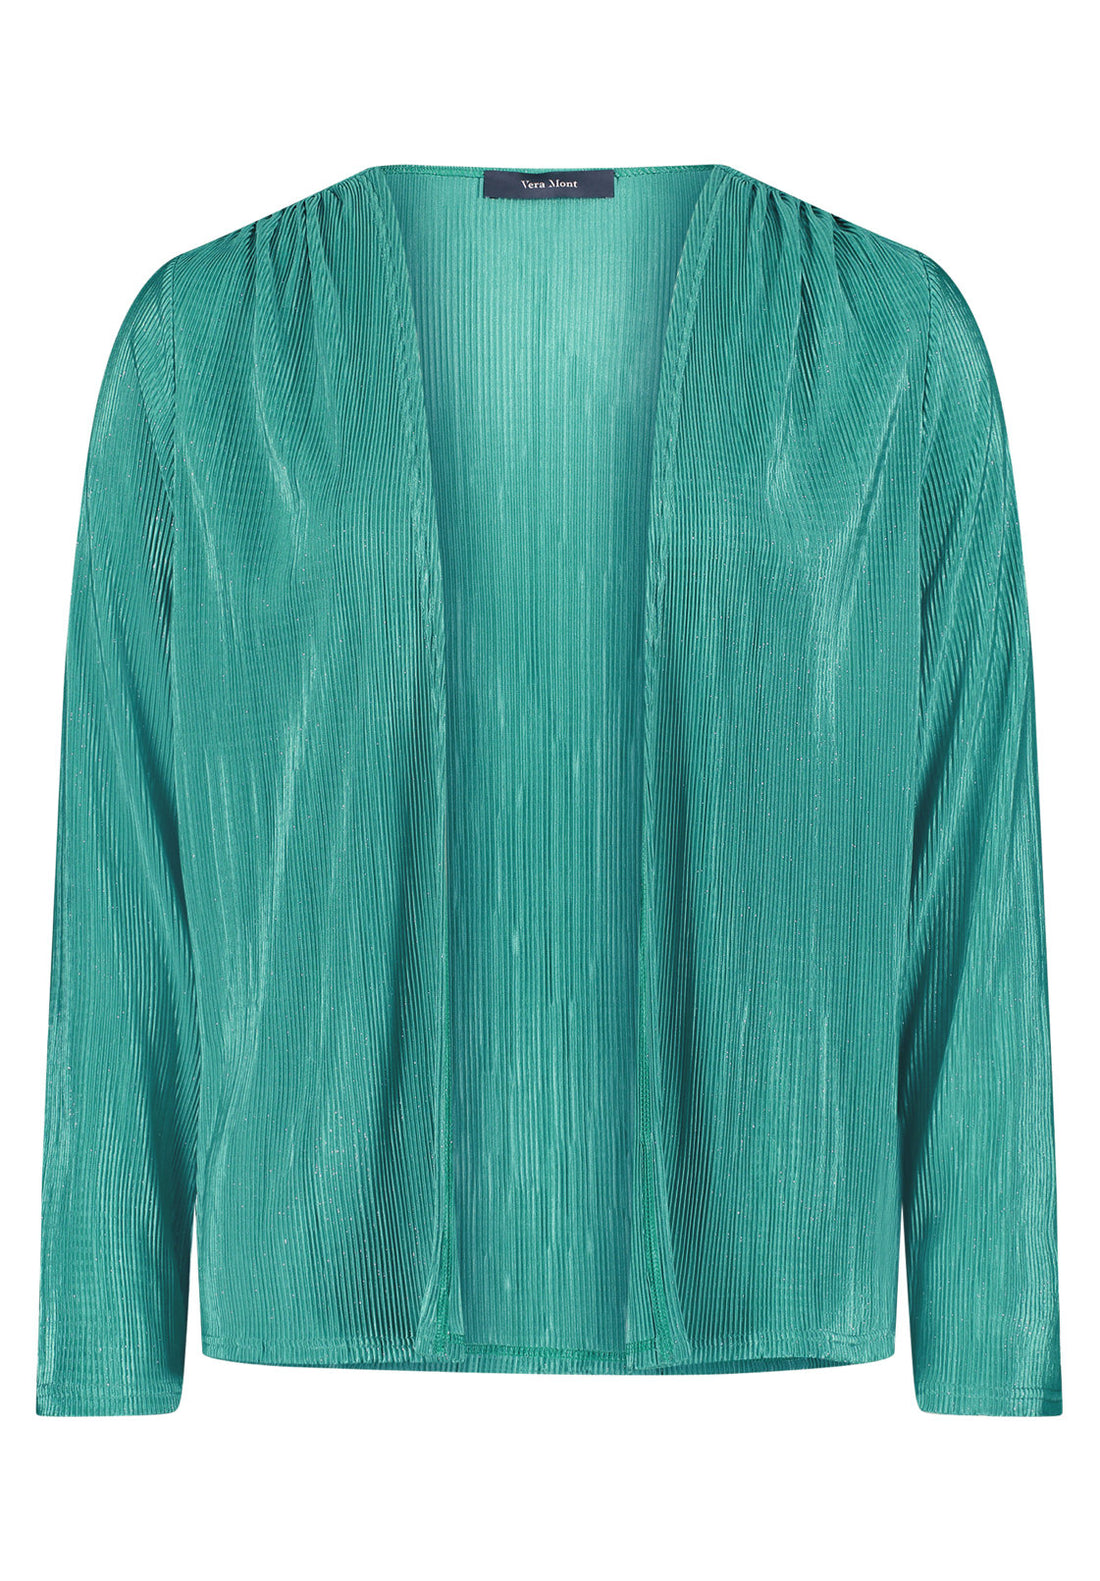 Pleated Cardigan With No Closures_4844 4143_5896_01